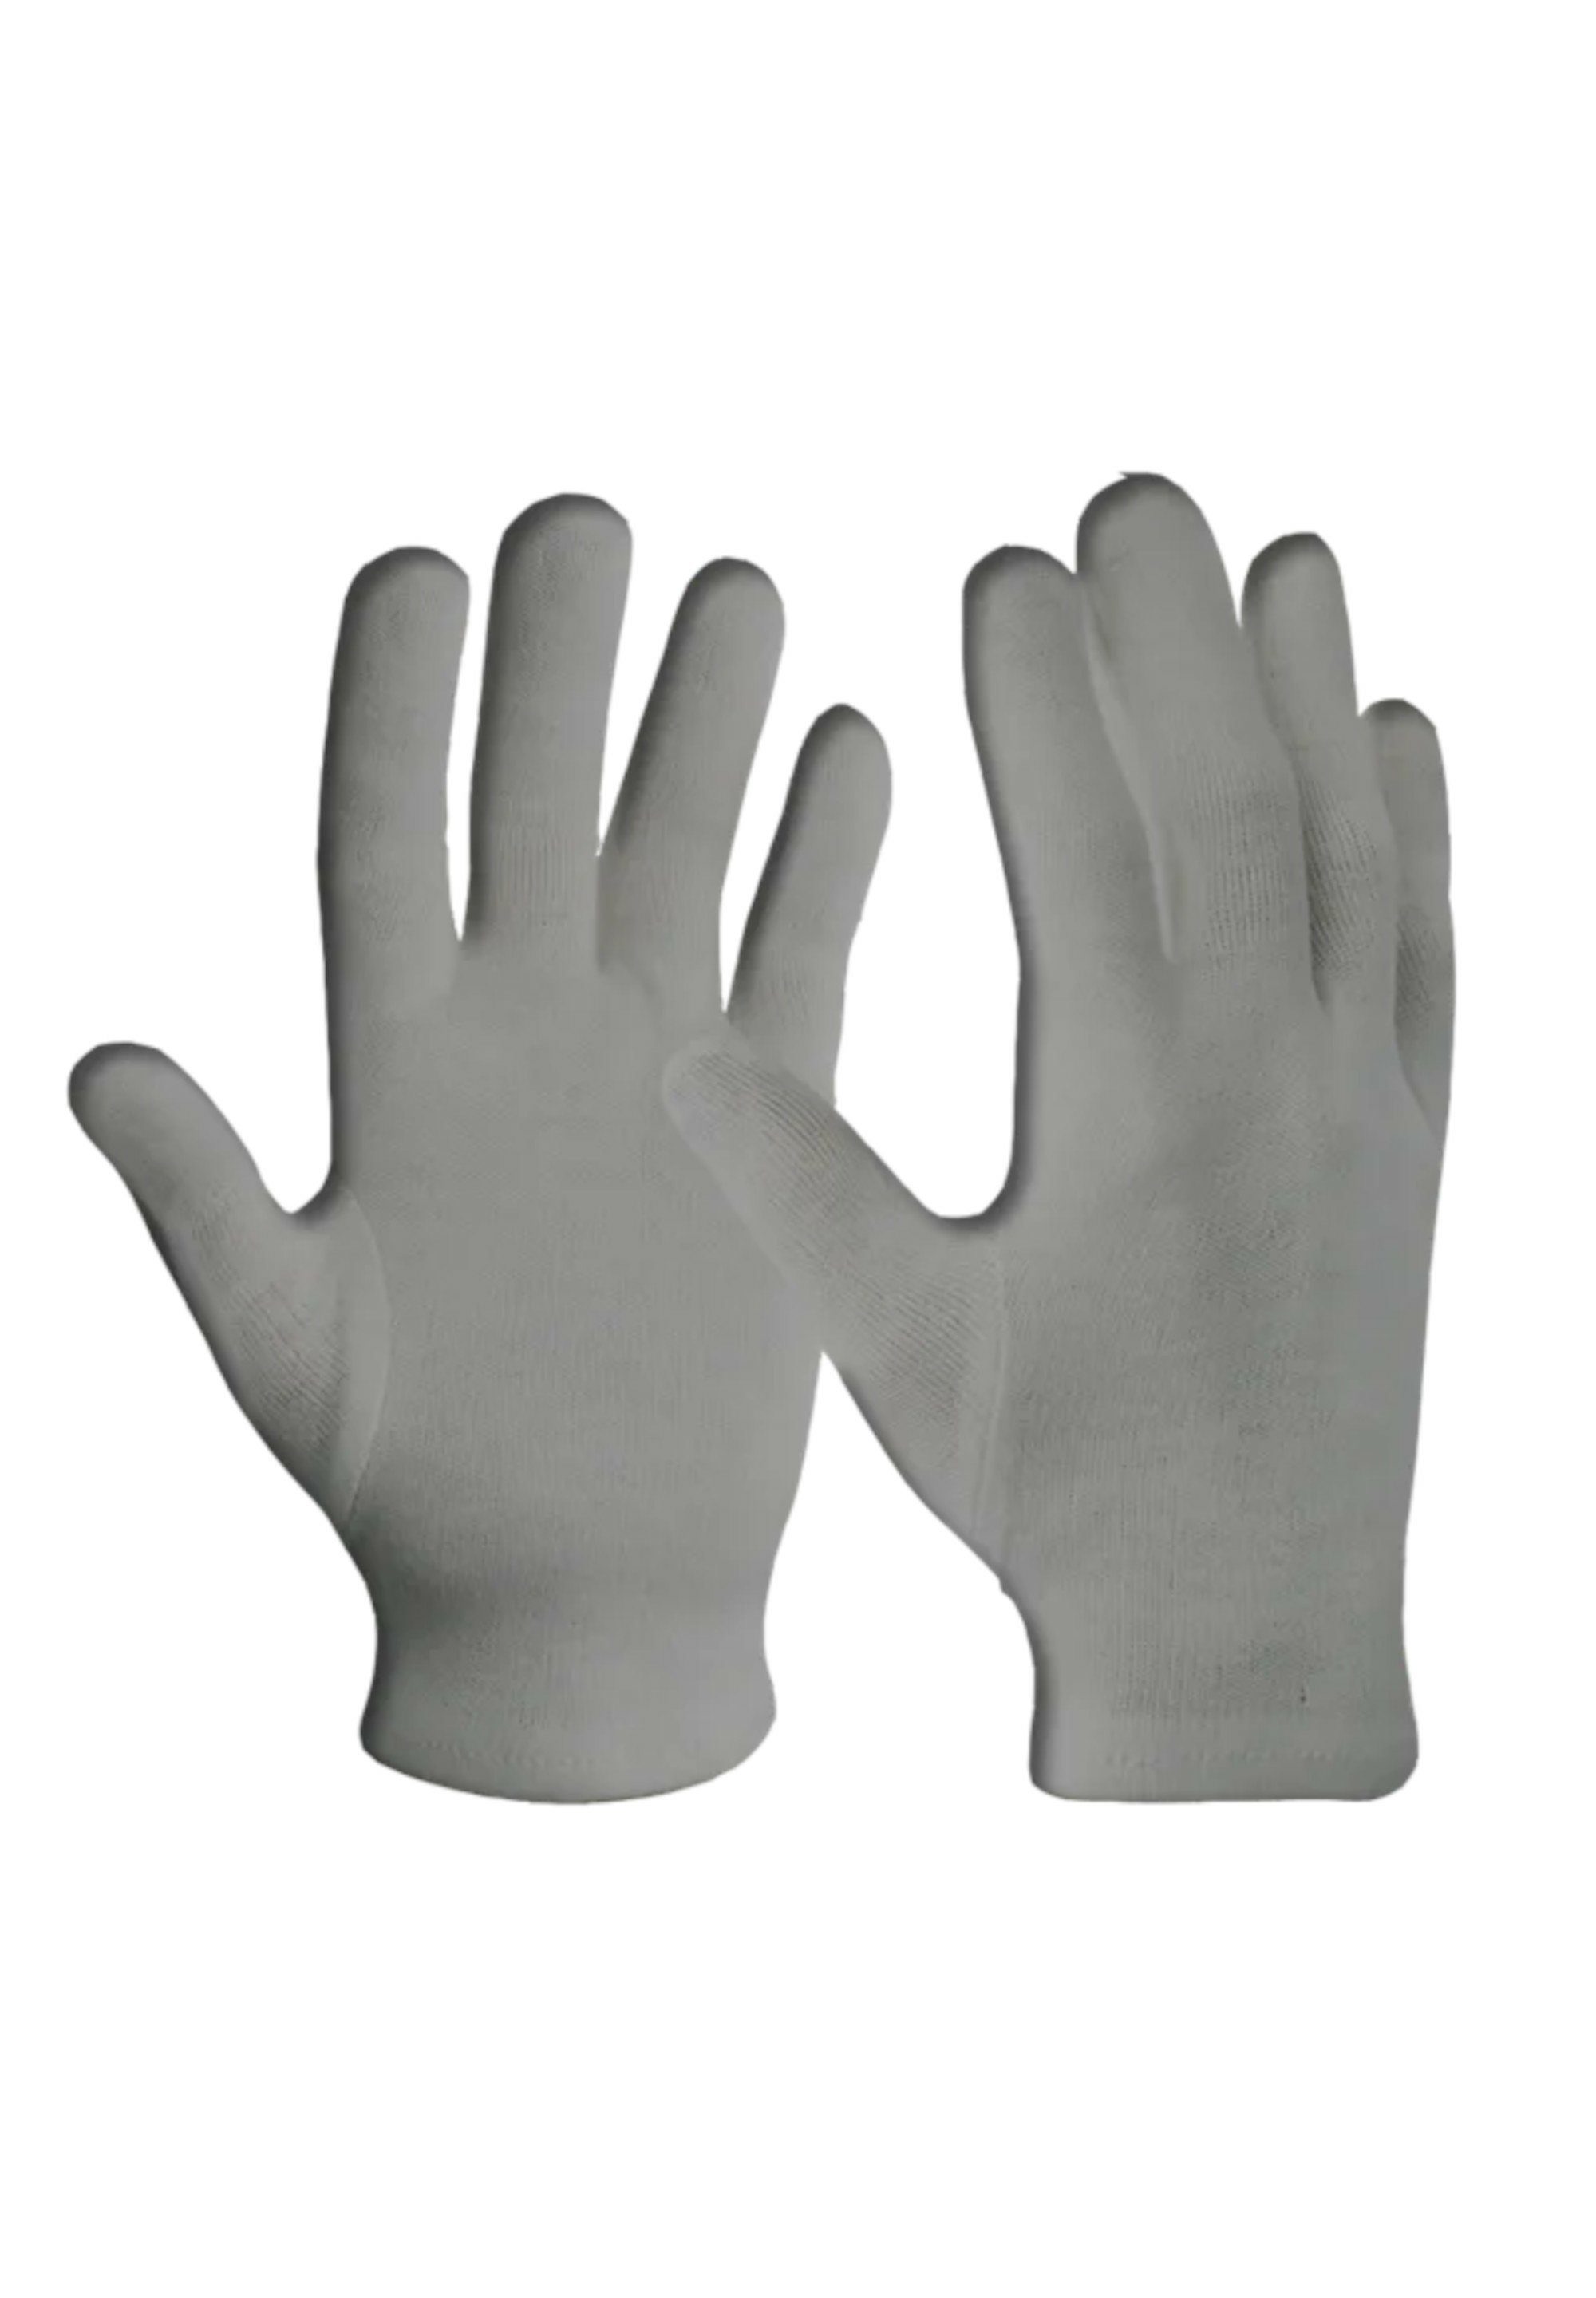 ANTIMICROBIAL GLOVE We focus gloves PROTECTIVE on Zanier Multisporthandschuhe